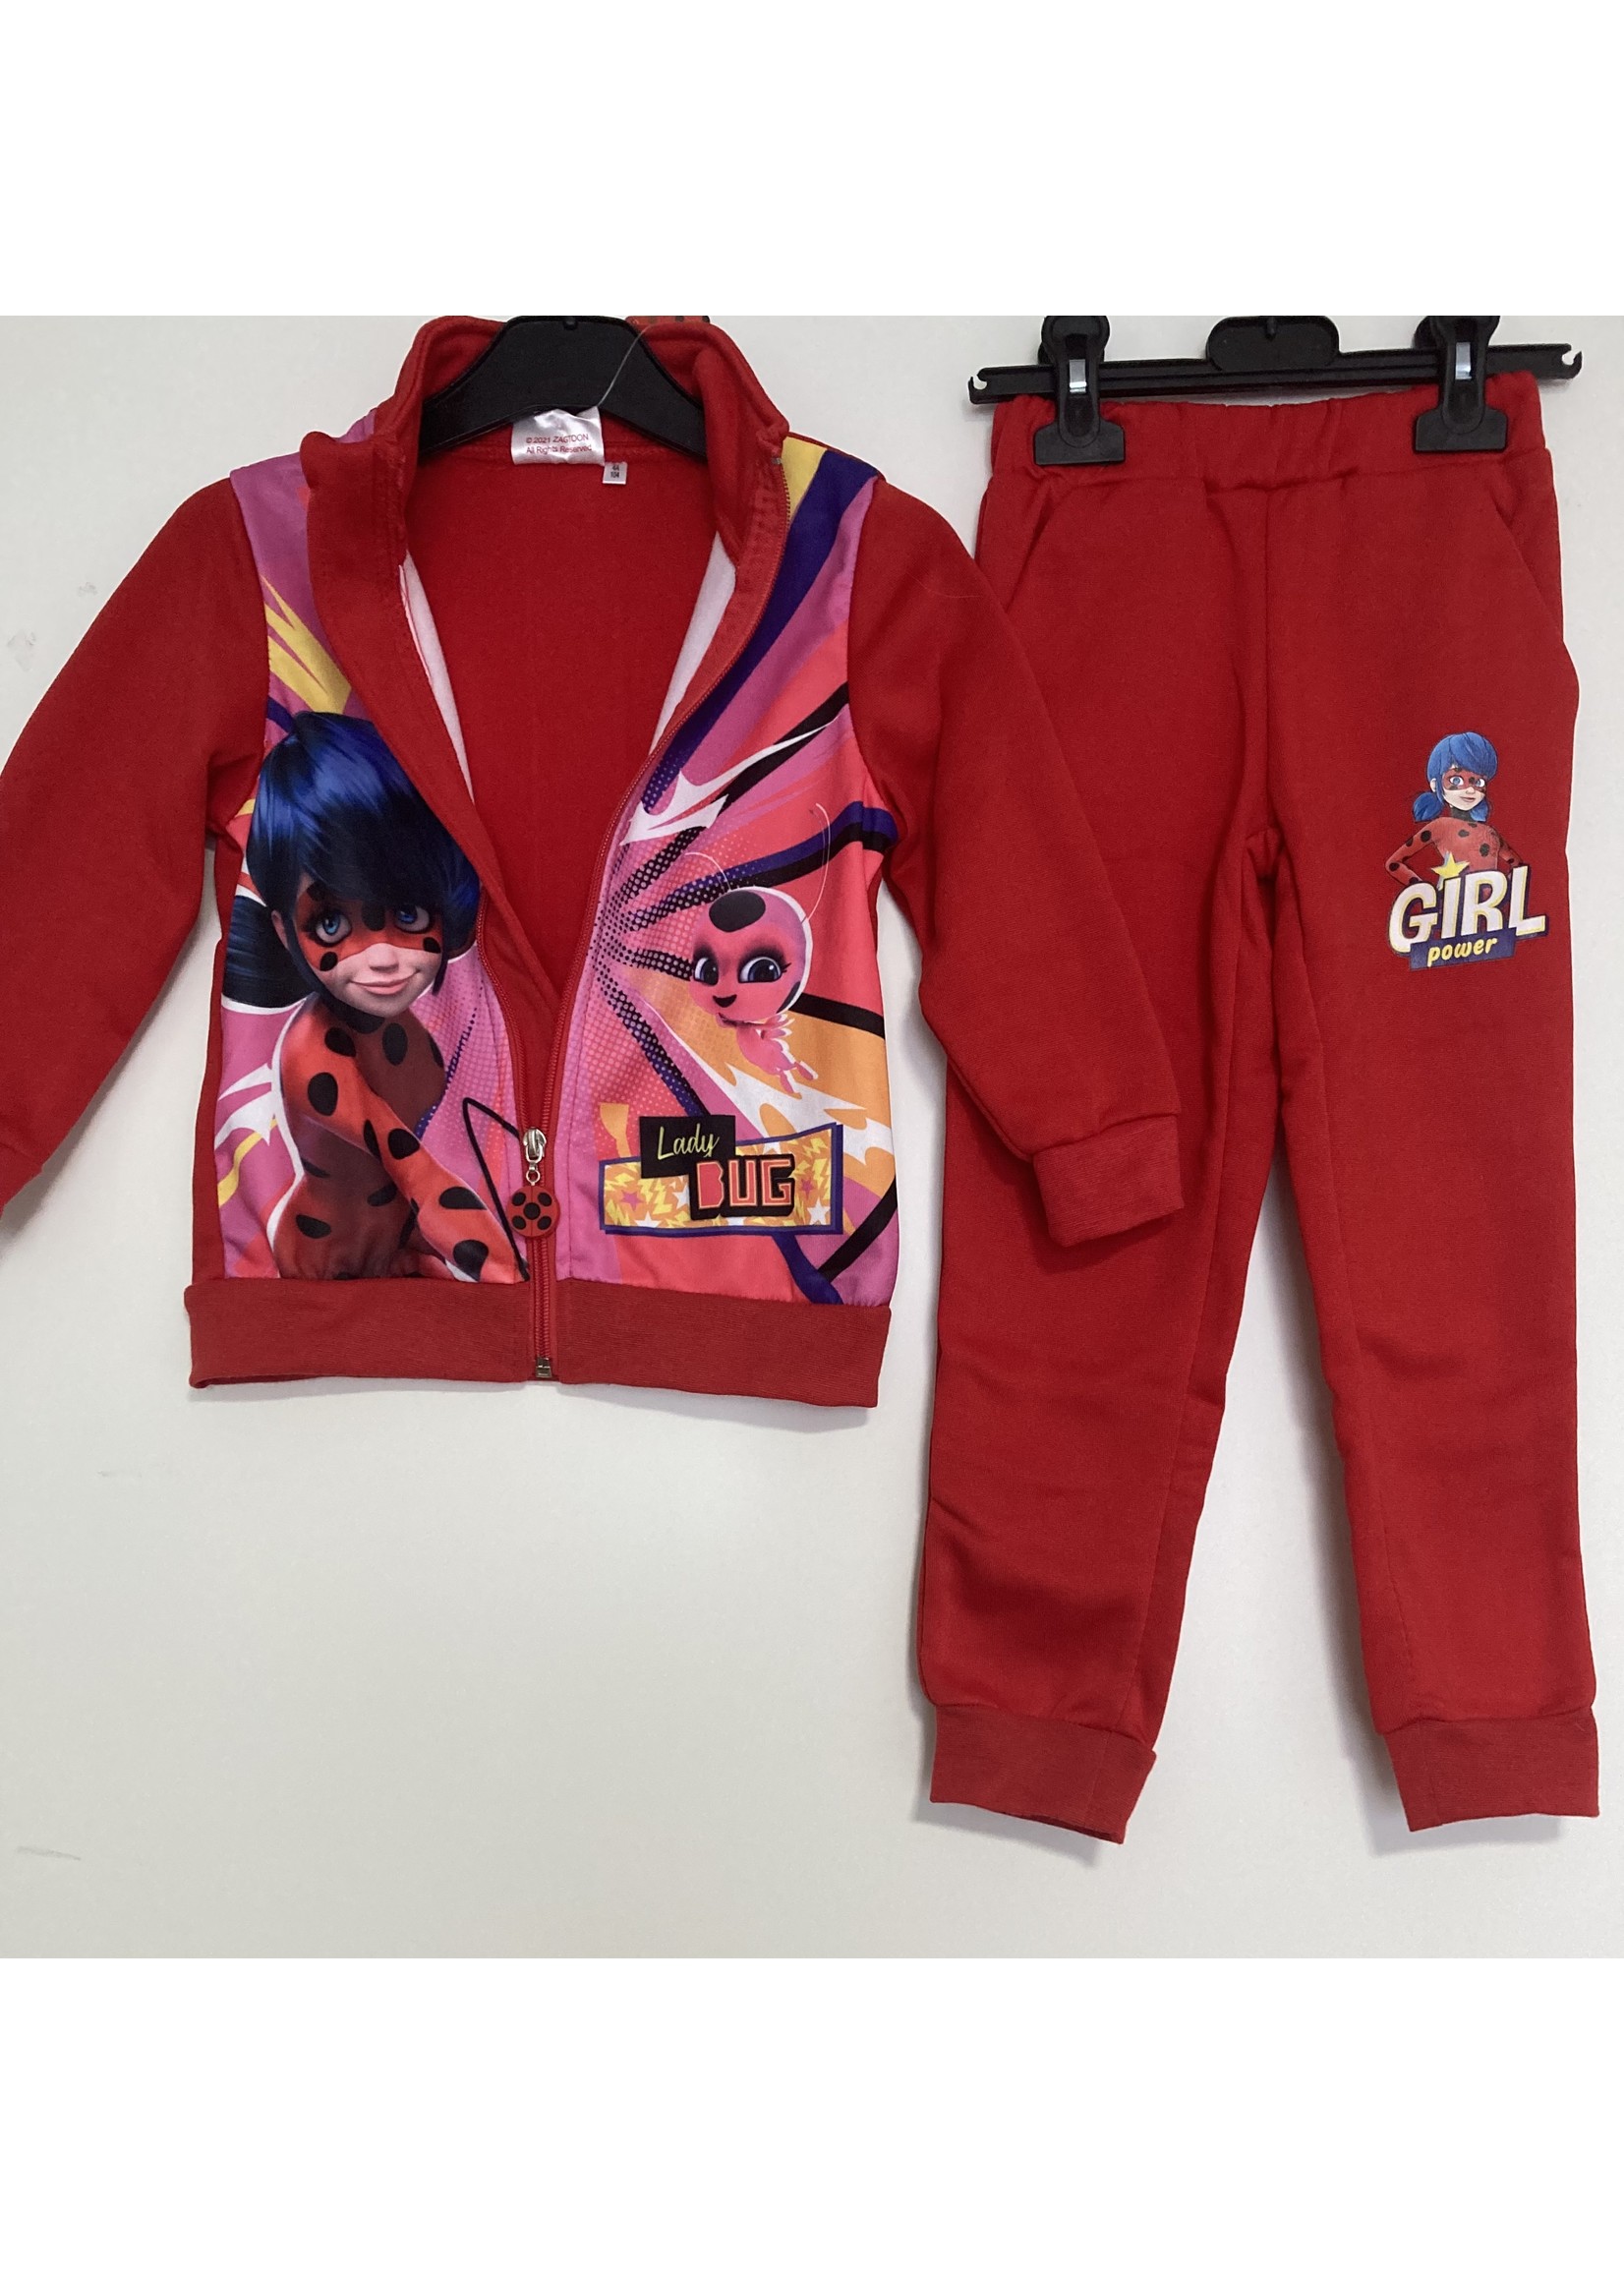 Miraculous Ladybug tracksuit from Miraculous red